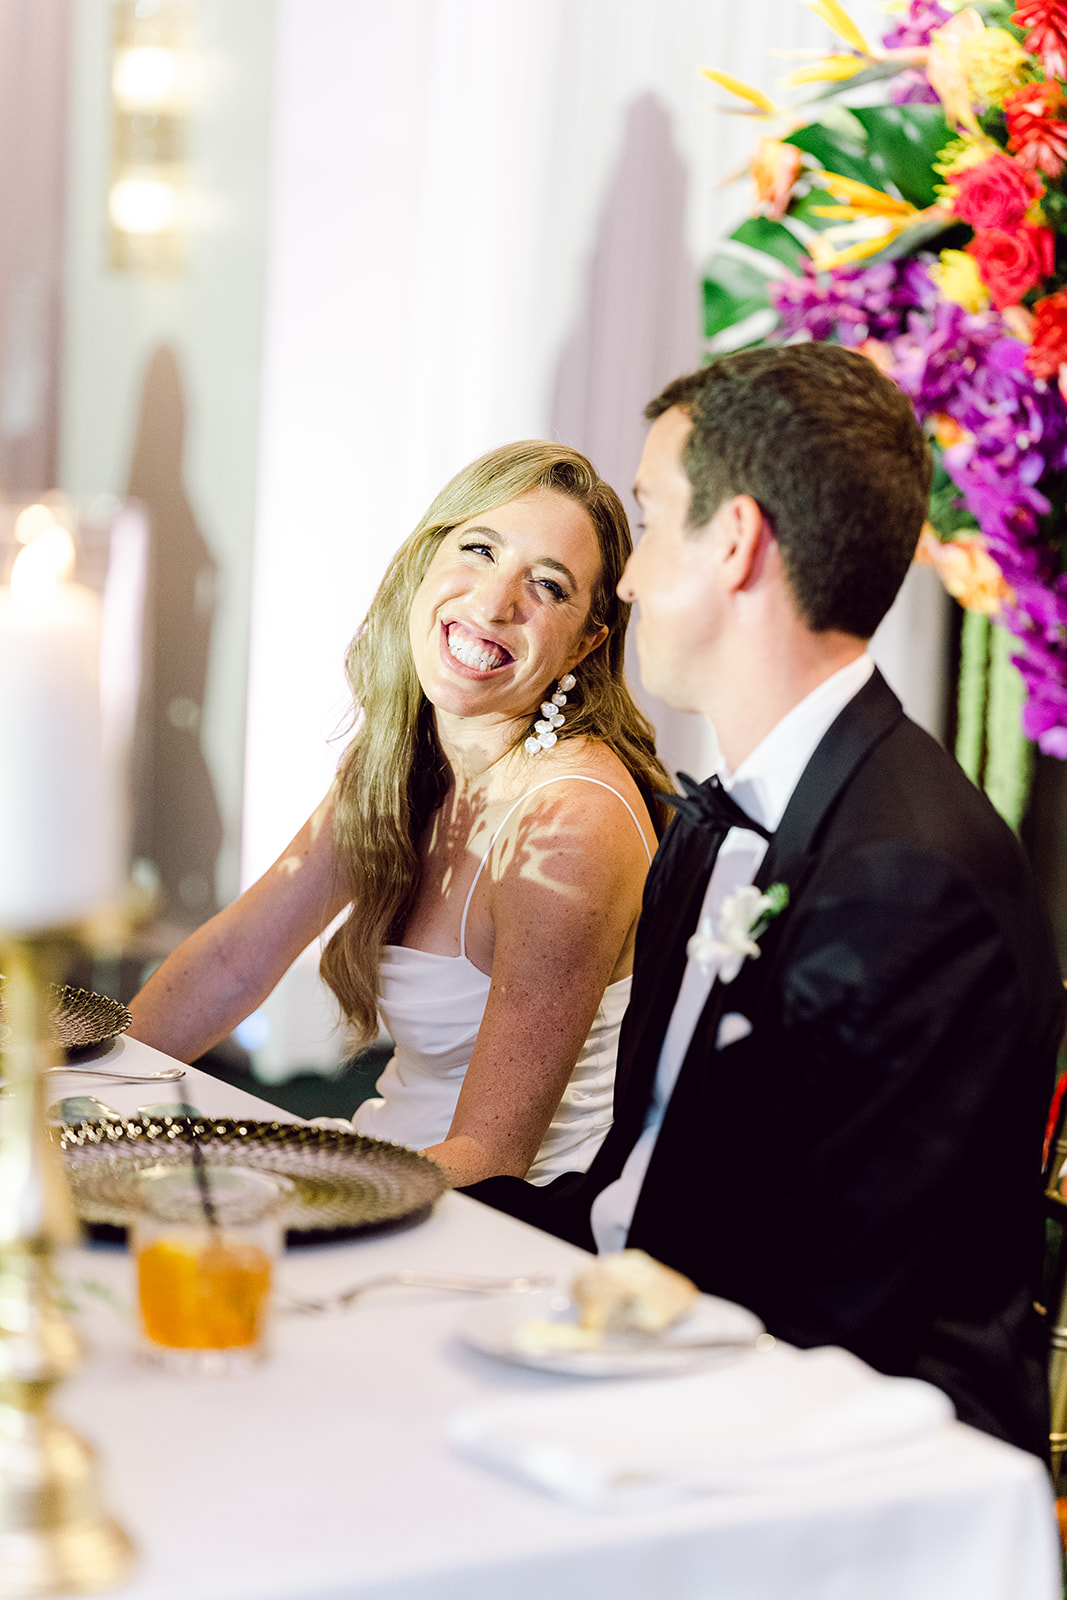 Bride smiles at groom during speech and toast at reception hall of Mayfair House Hotel & Garden, Miami on wedding day.